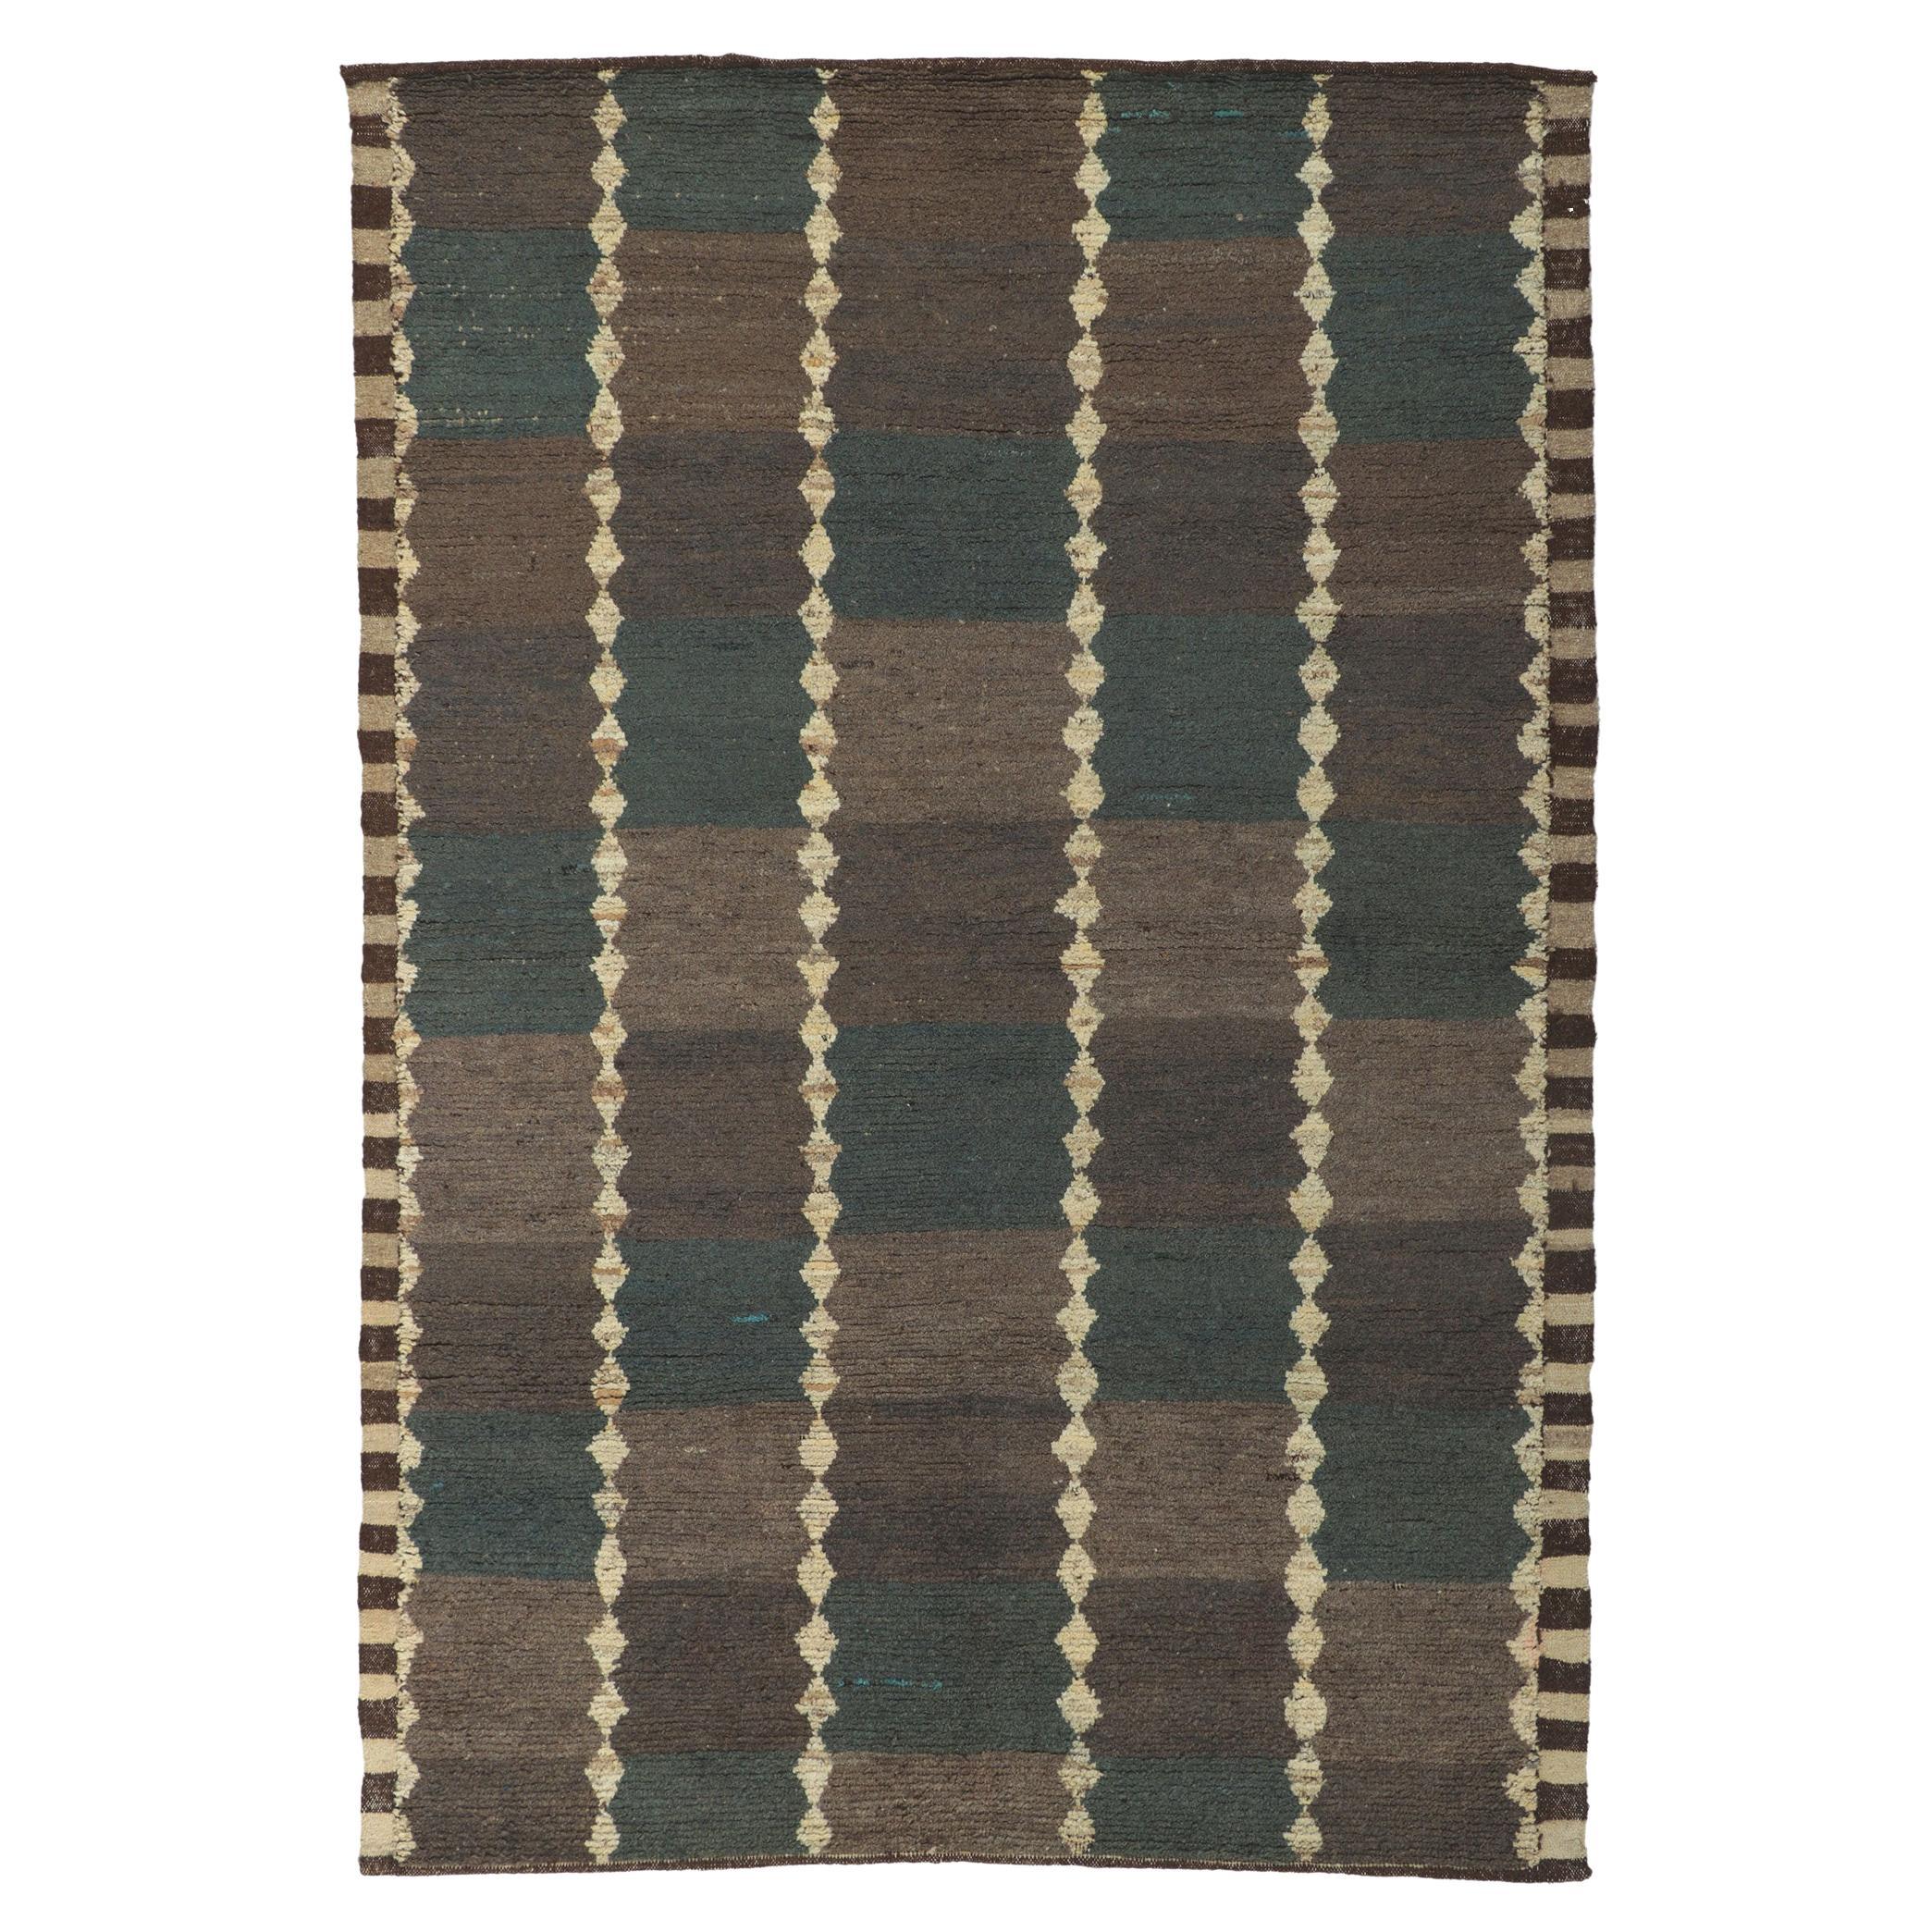 Earth-tone Checkered Moroccan Rug, Masculine Appeal Meets Midcentury Modern For Sale